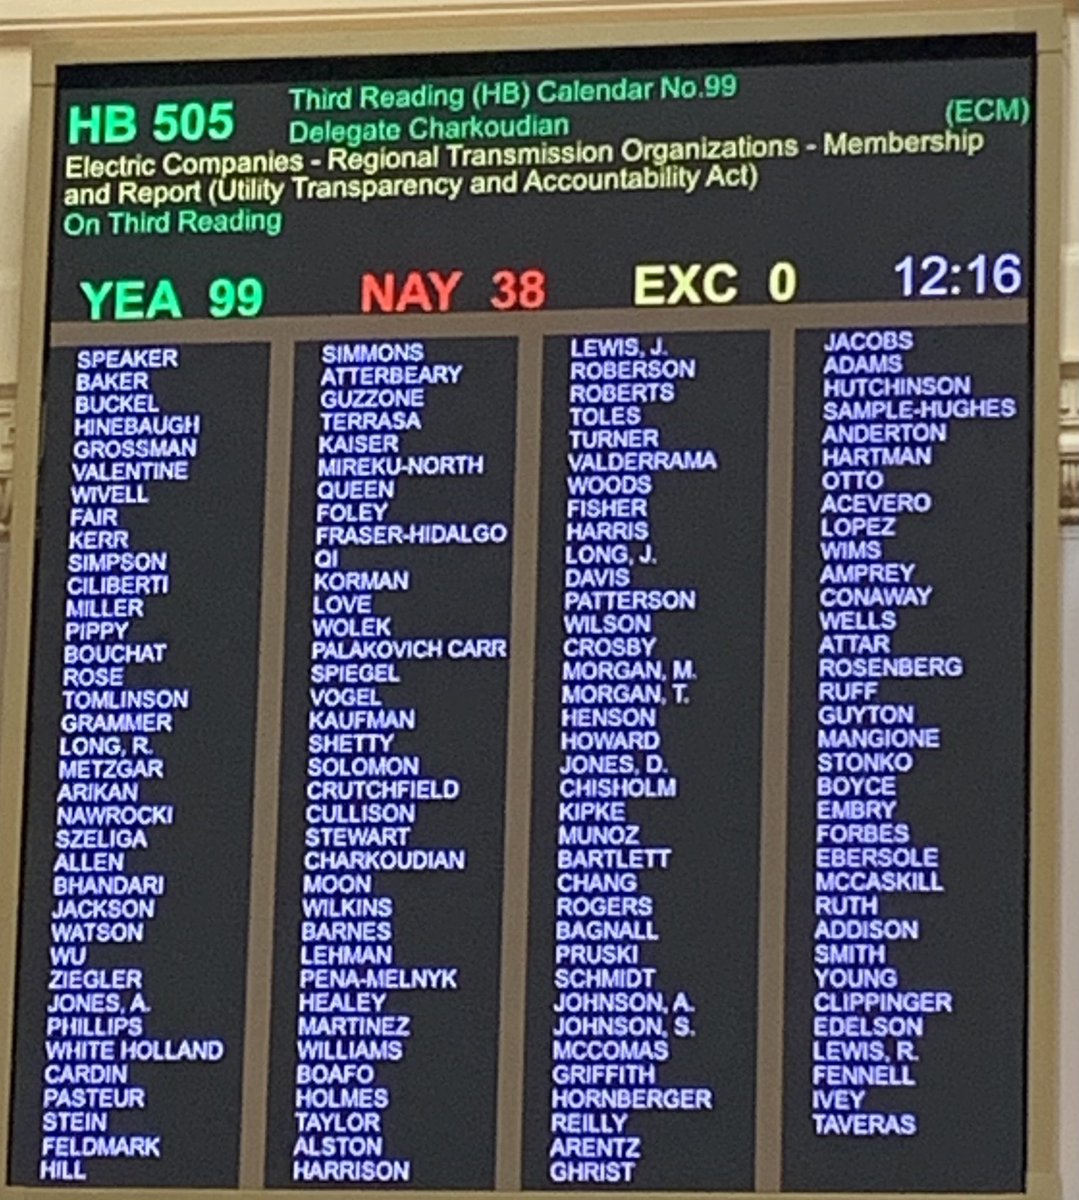 HB505 - Utility Transparency & Accountability Act passed the House. Requires transparency in utility voting at @pjminterconnect and will save rate-payers $20 million/year. #MDDemsAtWork #MDGA24